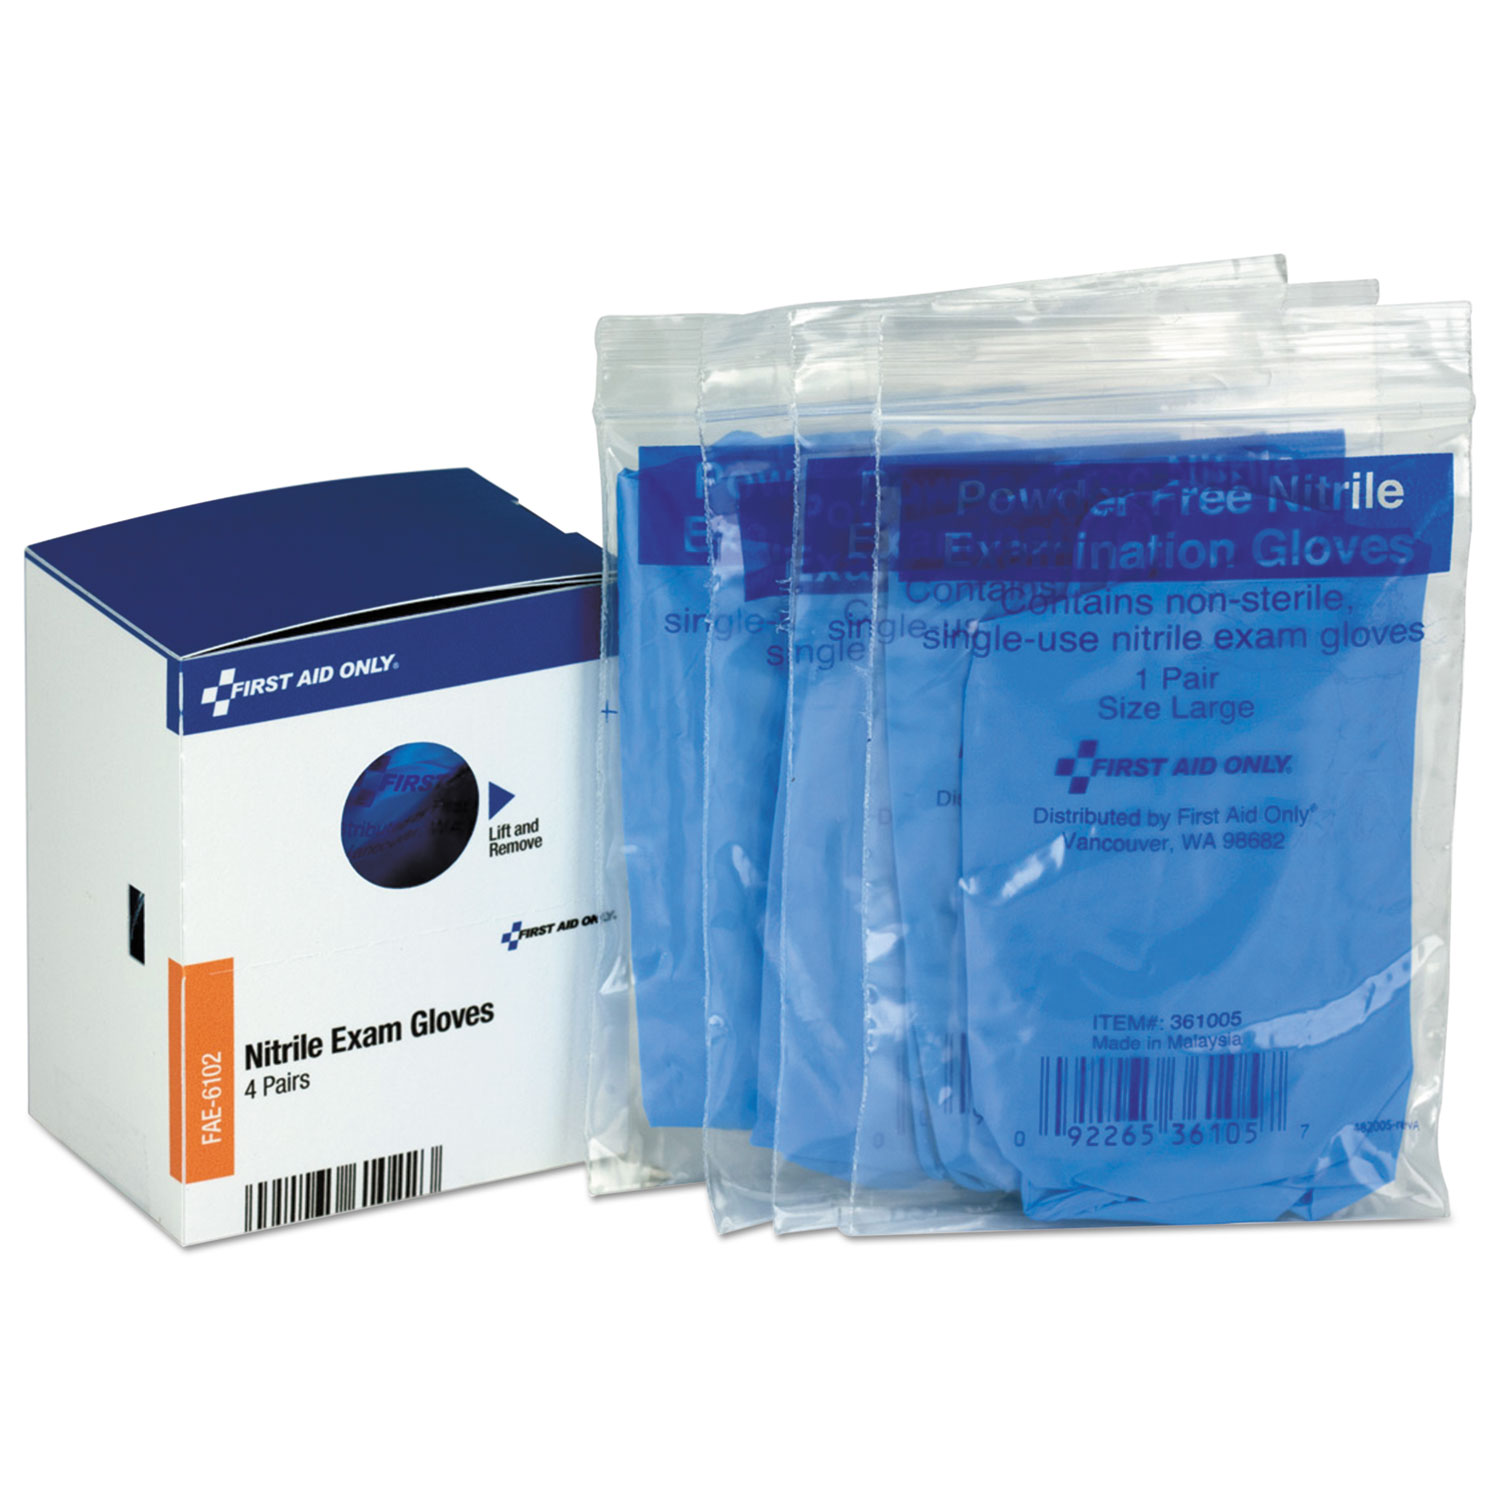  First Aid Only FAE-6102 Refill for SmartCompliance General Business Cabinet, Nitrile Exam Gloves, 4Pr/Bx (FAOFAE6102) 